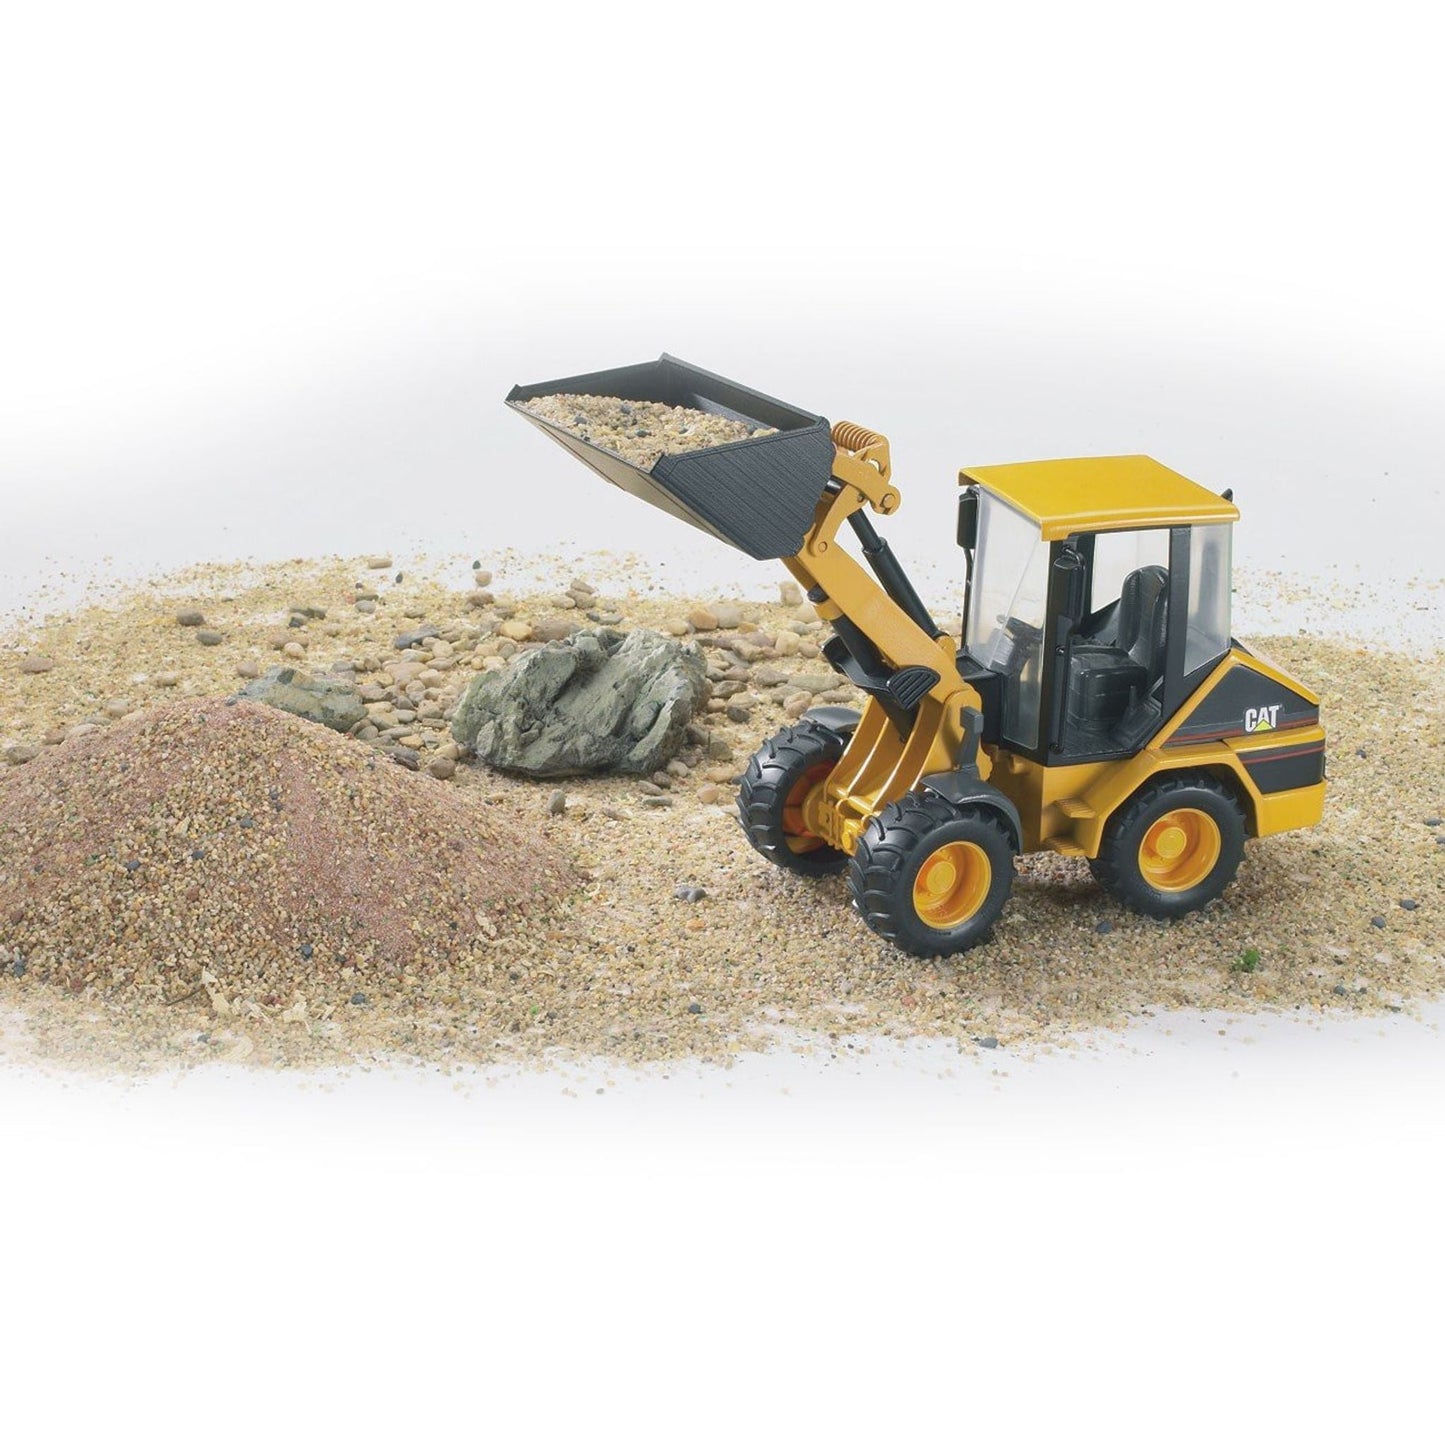 1:16 CATERPILLAR Compact Wheel loader - Toybox Tales